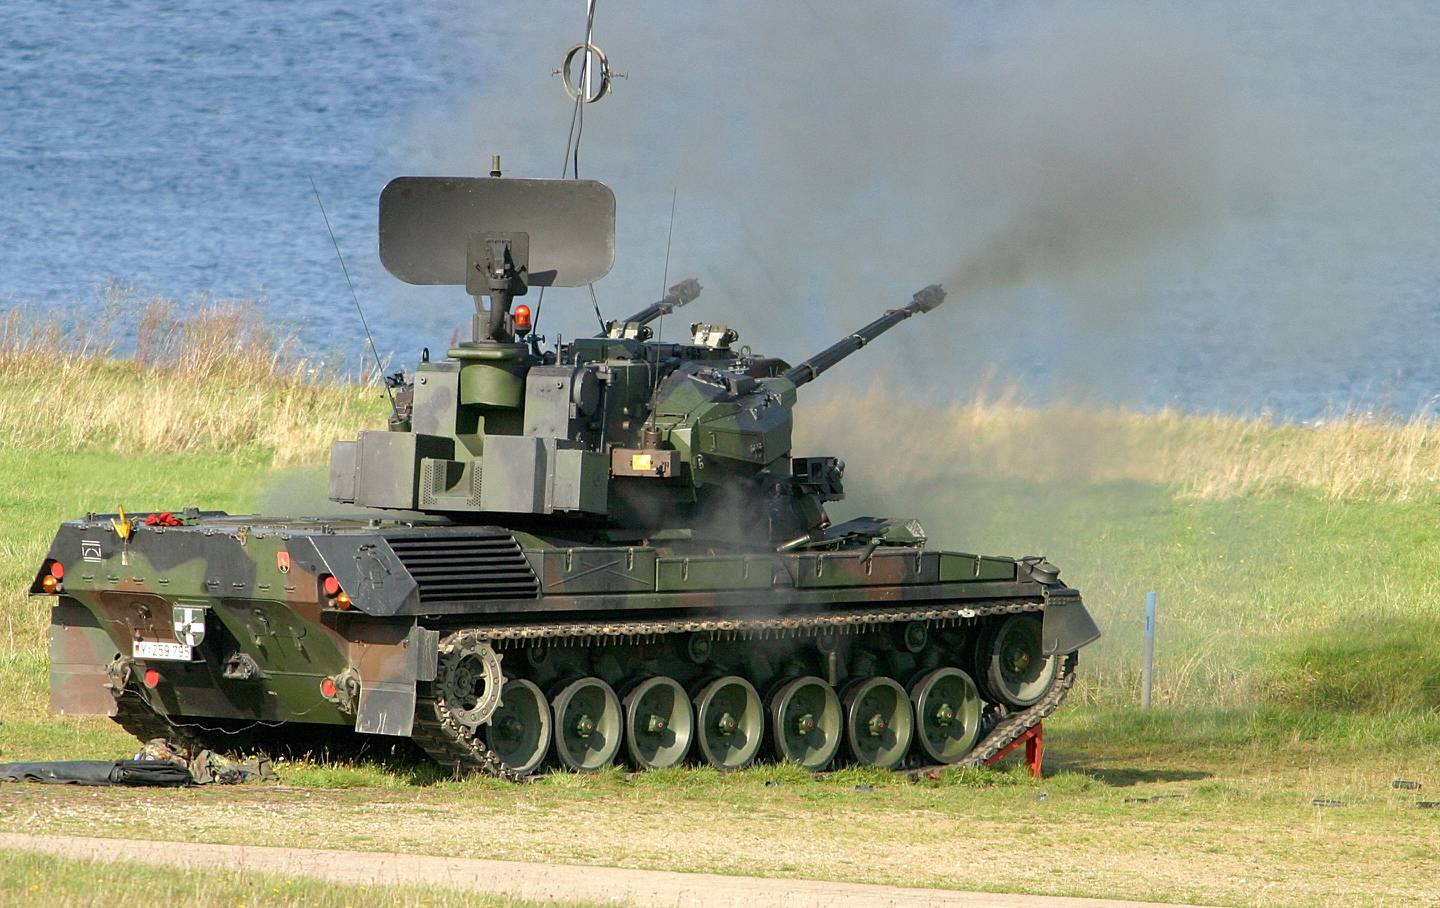 A Gepard anti-aircraft gun tank shooting at air targets during military training in Todendorf, northern Germany. AFP